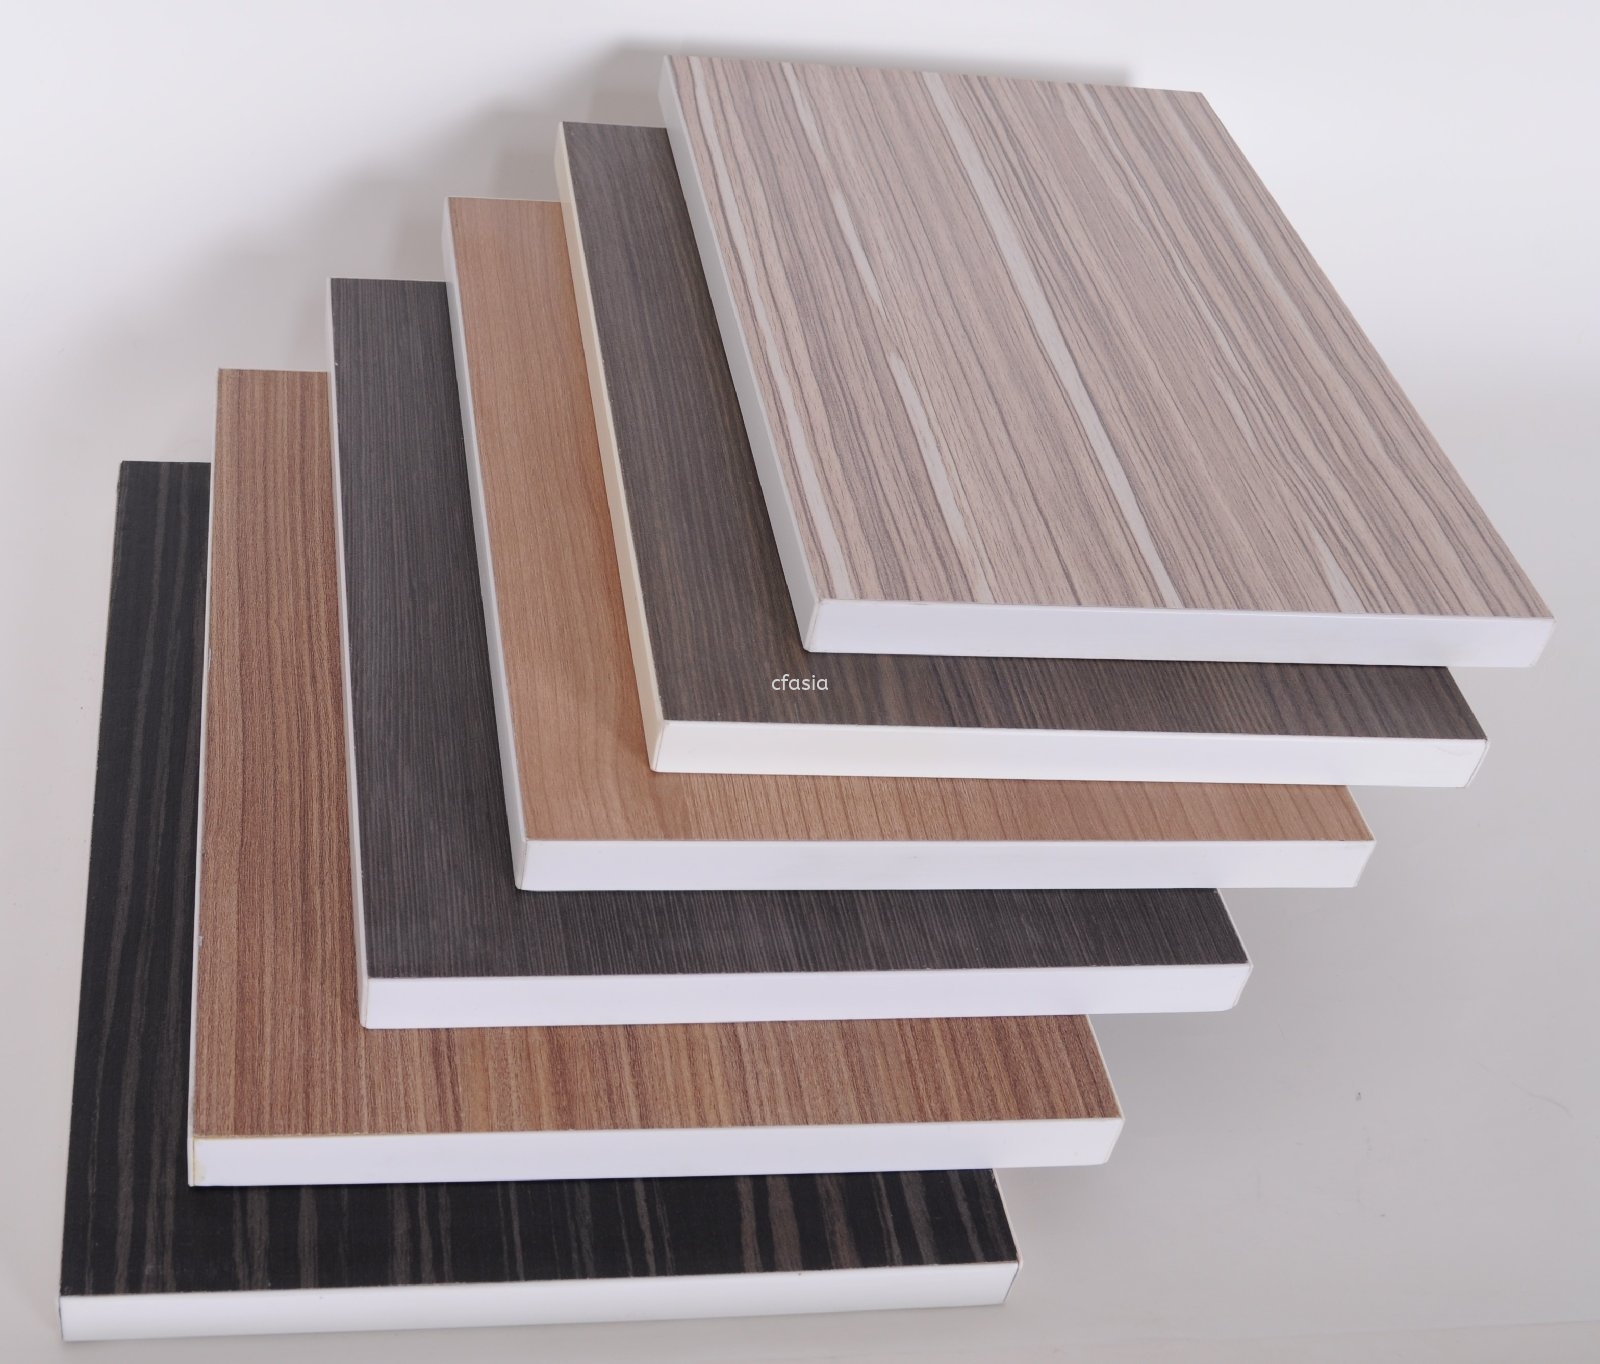 Latest News Melamine Board For Office Furniture Residence Project Cf Asia Trading Sdn Bhd